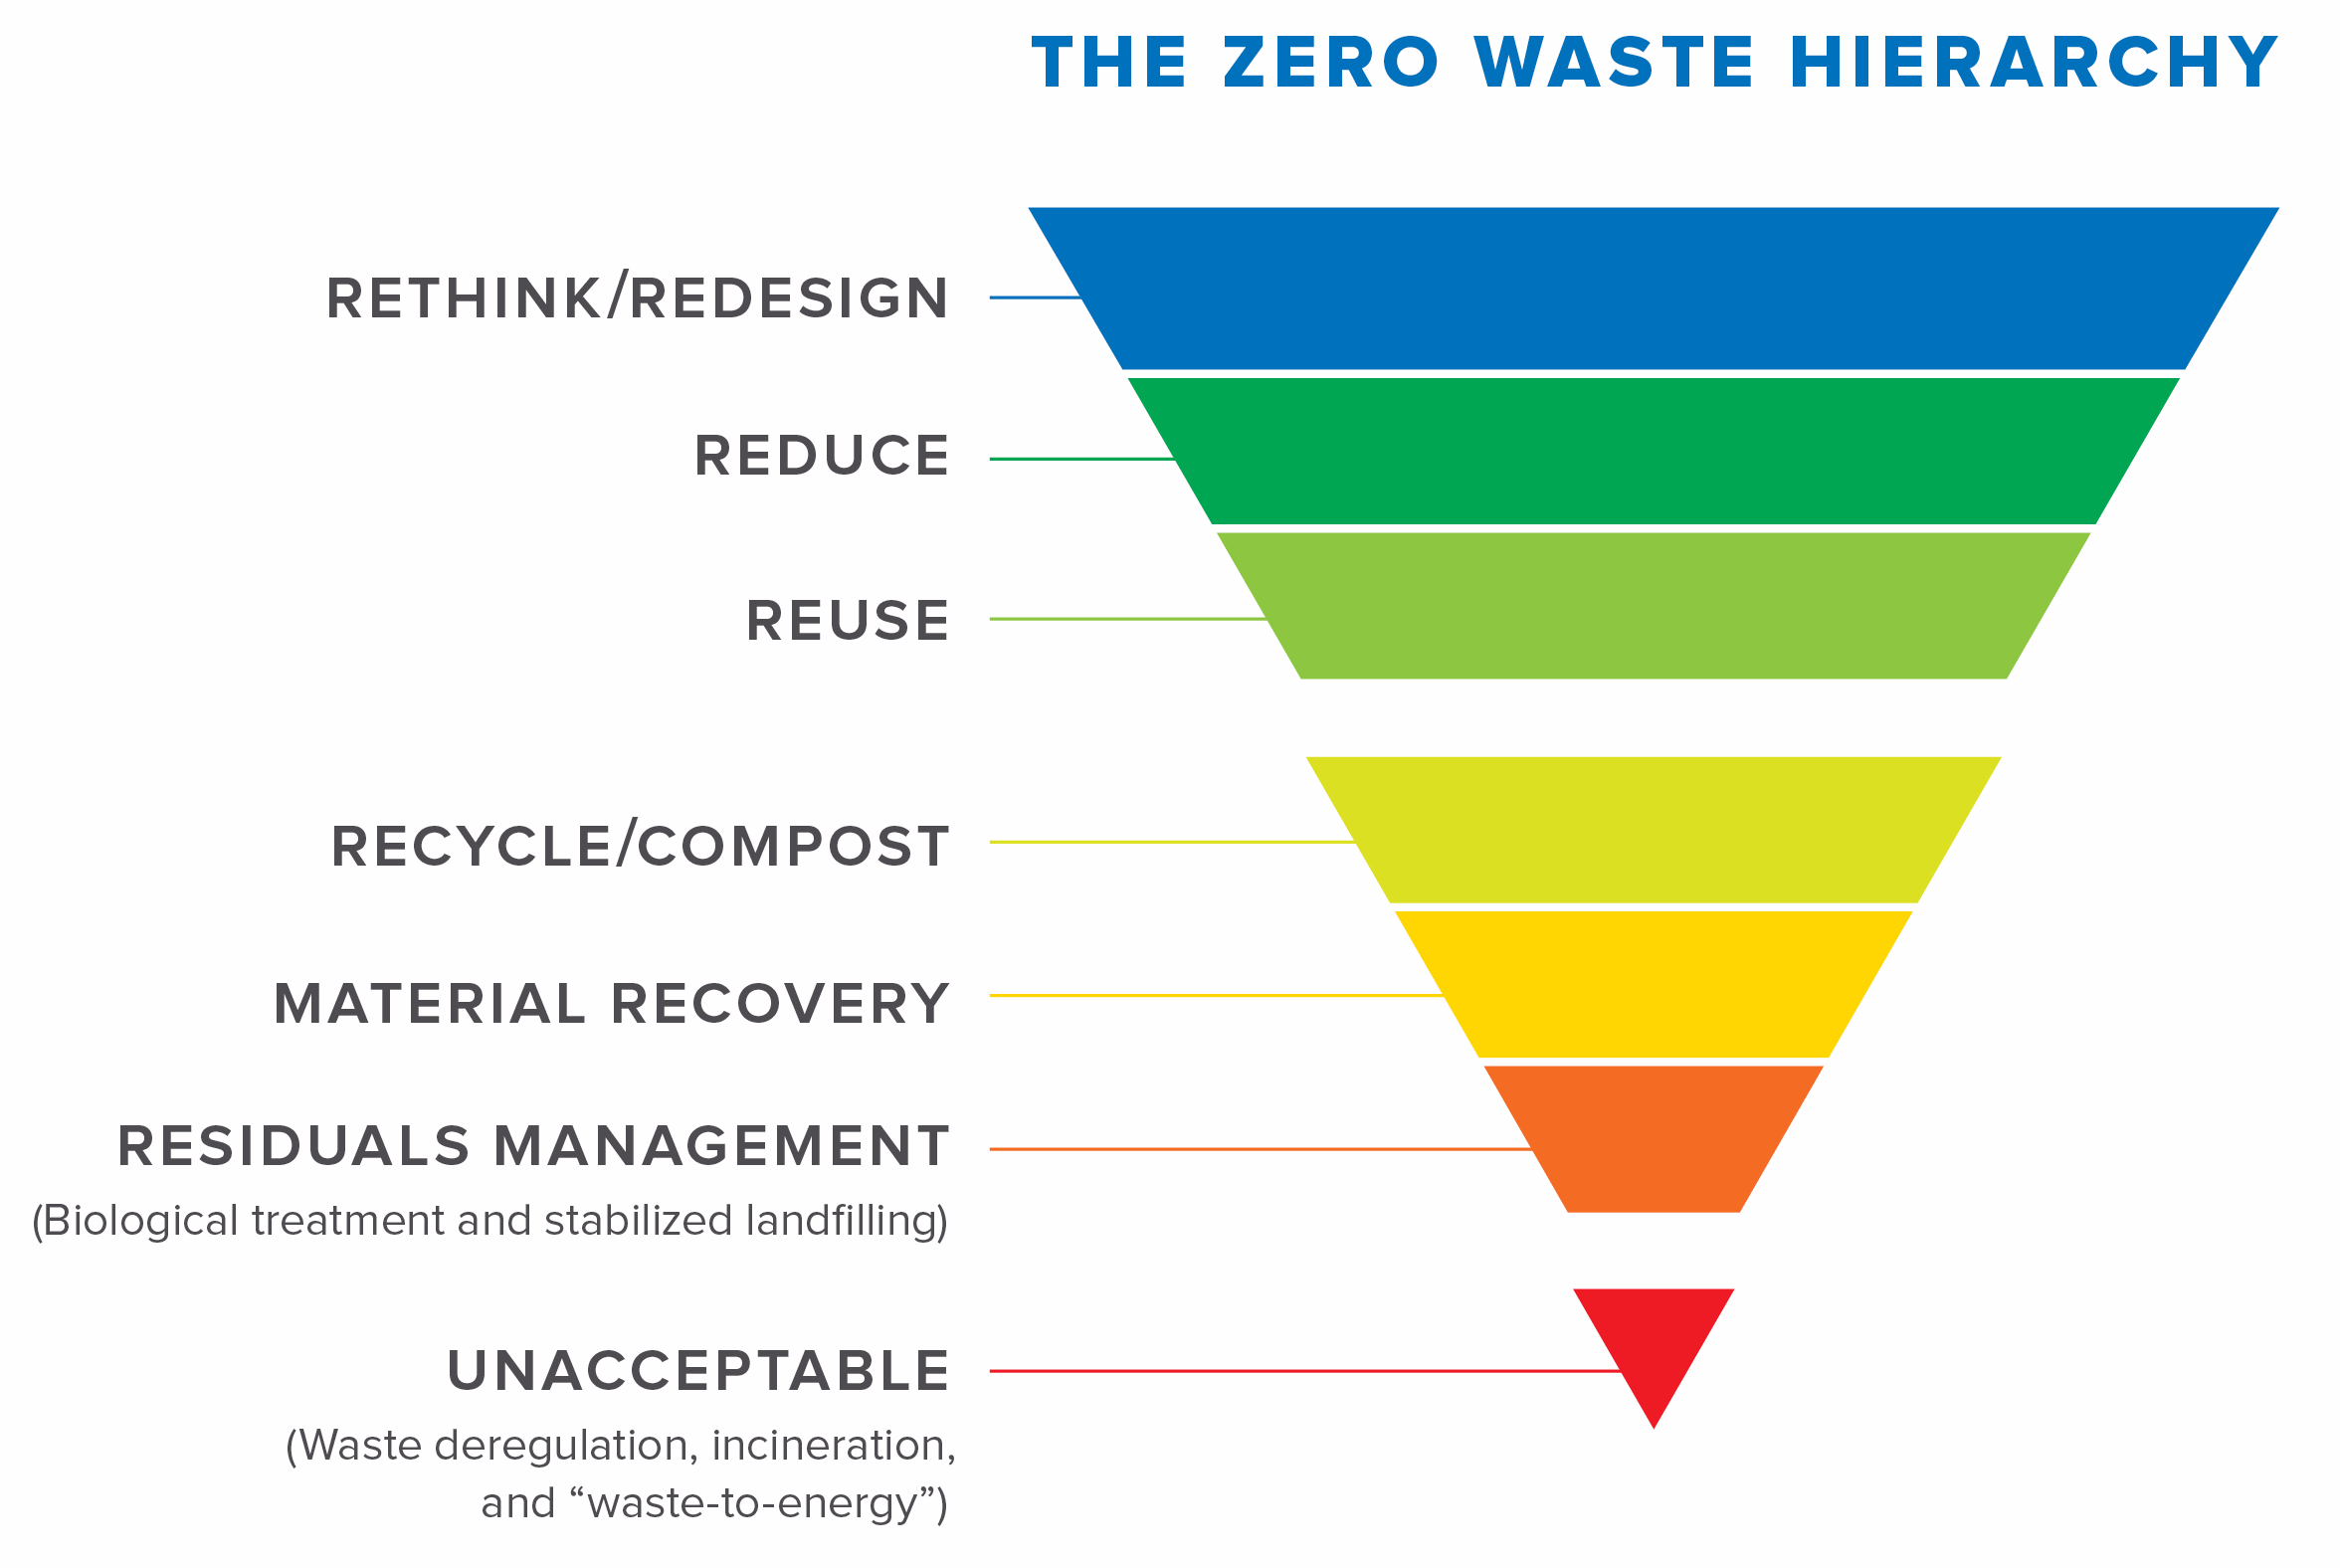 Zero Waste Heirarchy - an inverted pyramid of elements showing elements of the heirarchy